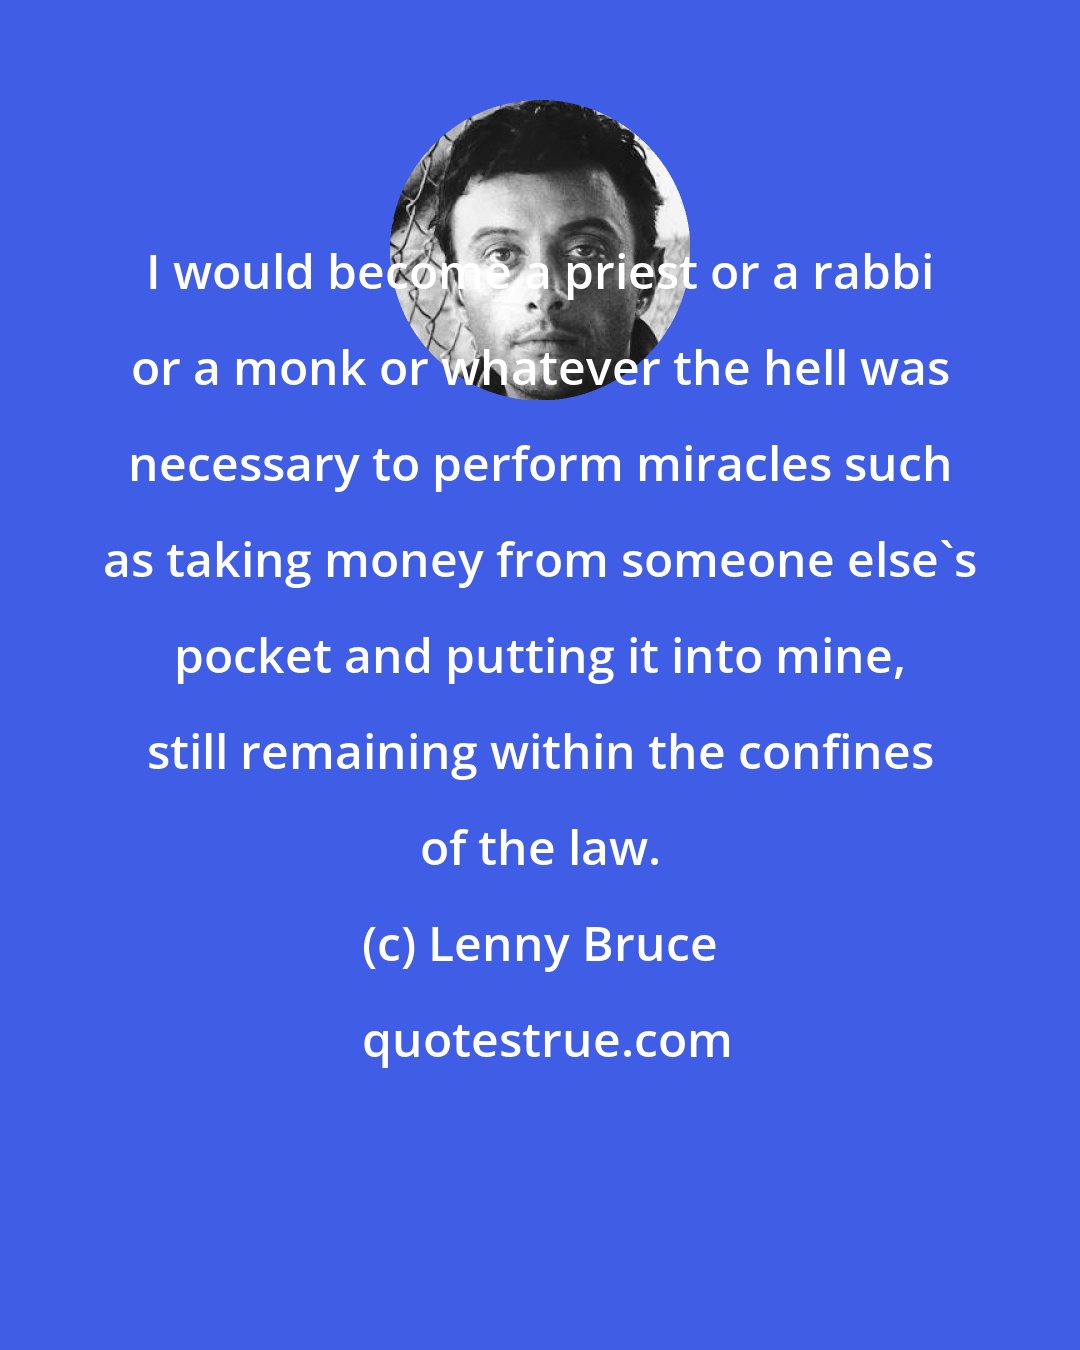 Lenny Bruce: I would become a priest or a rabbi or a monk or whatever the hell was necessary to perform miracles such as taking money from someone else's pocket and putting it into mine, still remaining within the confines of the law.